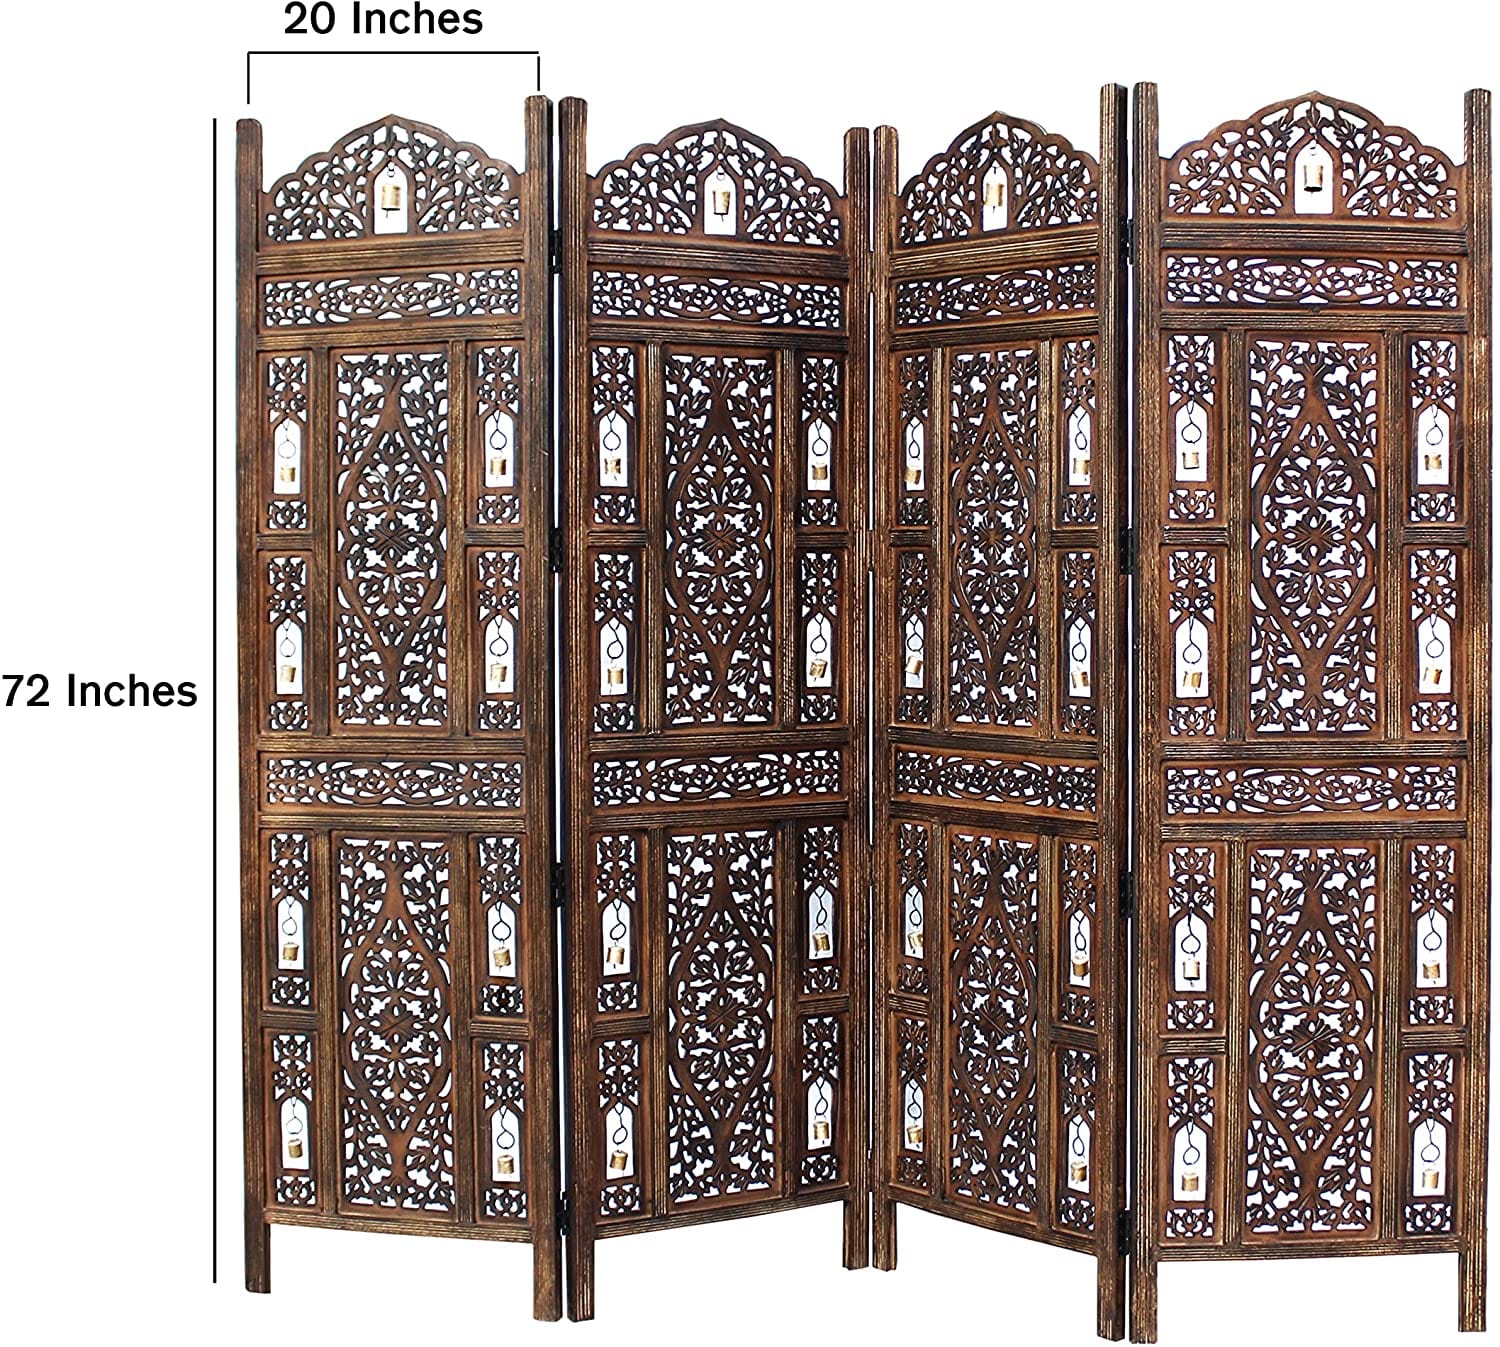 4 Panel Wooden Handcrafted Partition Room Divider Separator for Living Room Office Partition Screen Room Divider Wood Partitions for Home Kitchen & Office